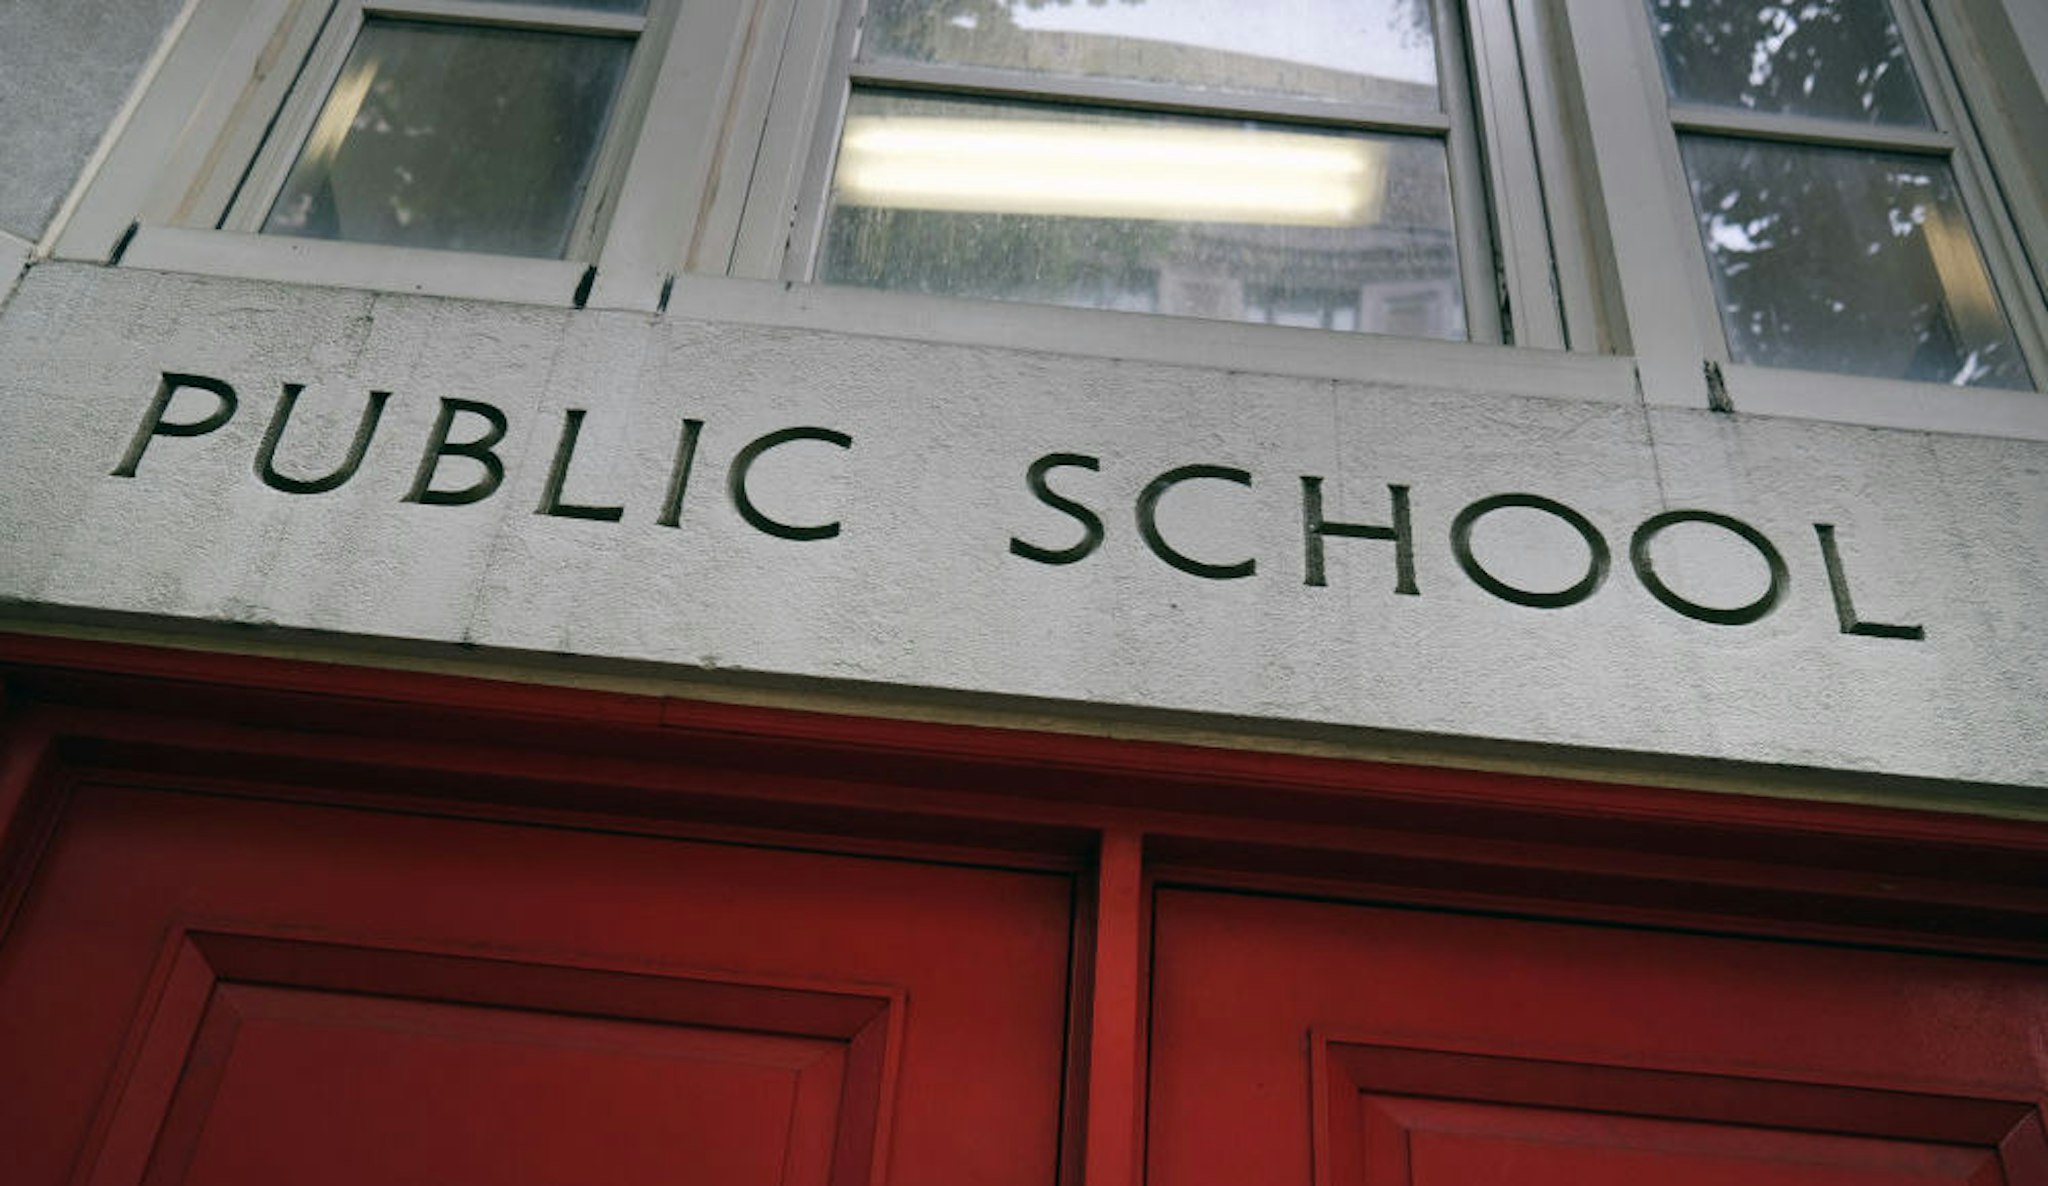 A public school stands on the Upper East Side on August 07, 2020 in the Manhattan borough of New York City. Due to the low COVID-19 infection rates reported in the city, New York Governor Andrew Cuomo announced Friday that all New York school districts may reopen this fall. (Photo by Spencer Platt/Getty Images)